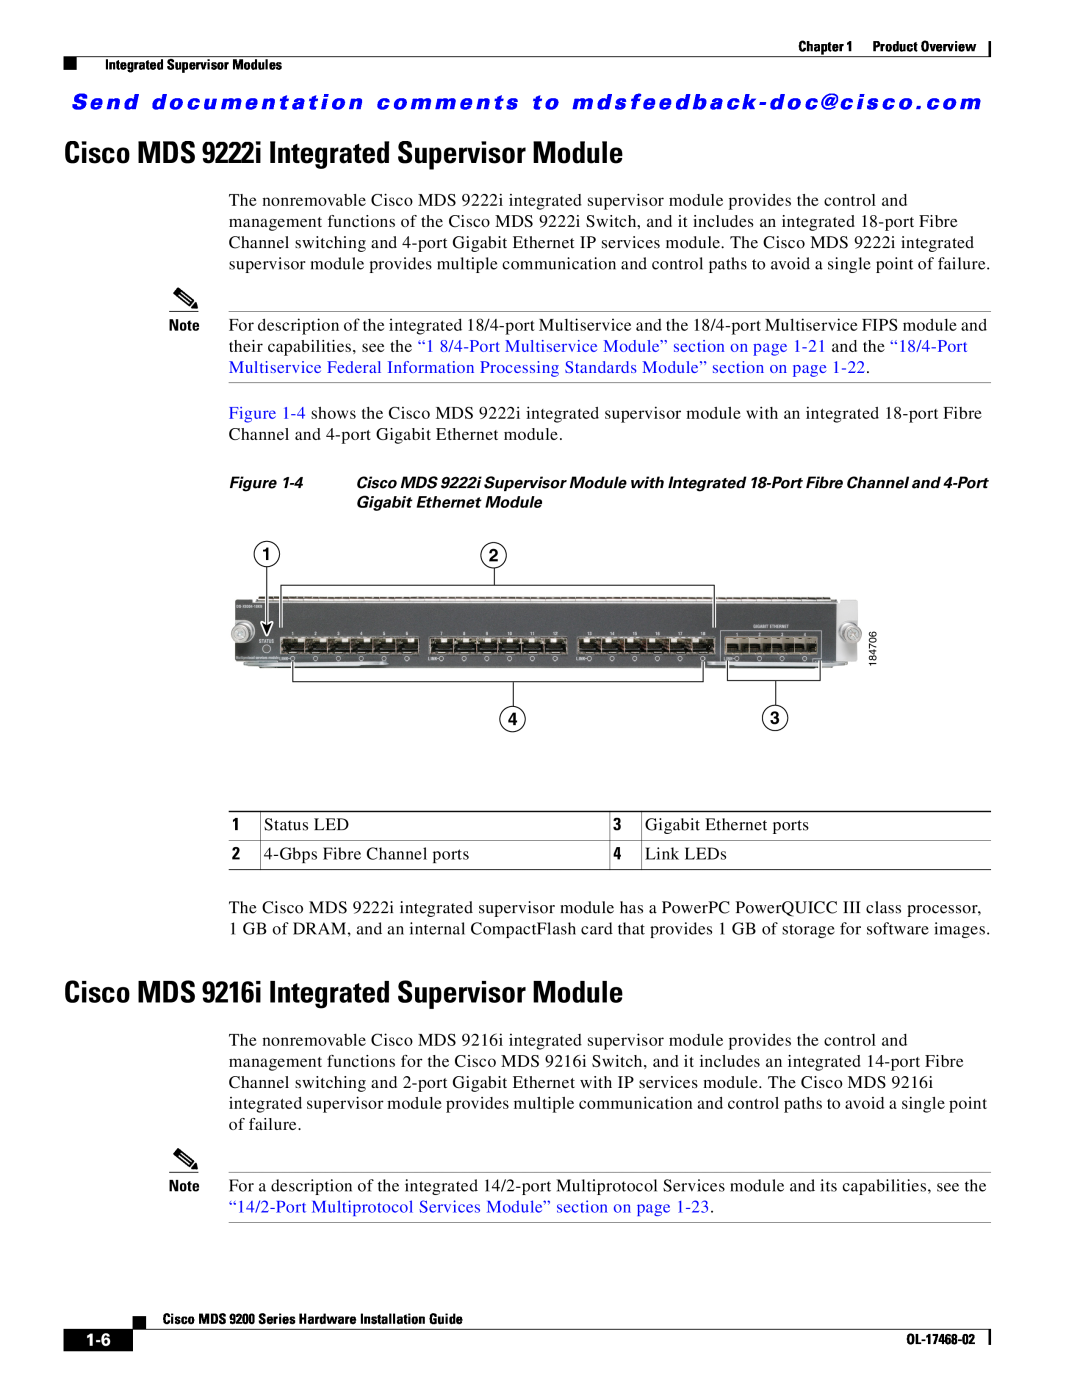 Cisco Systems MDS 9200 Series Cisco MDS 9222i Integrated Supervisor Module, Cisco MDS 9216i Integrated Supervisor Module 